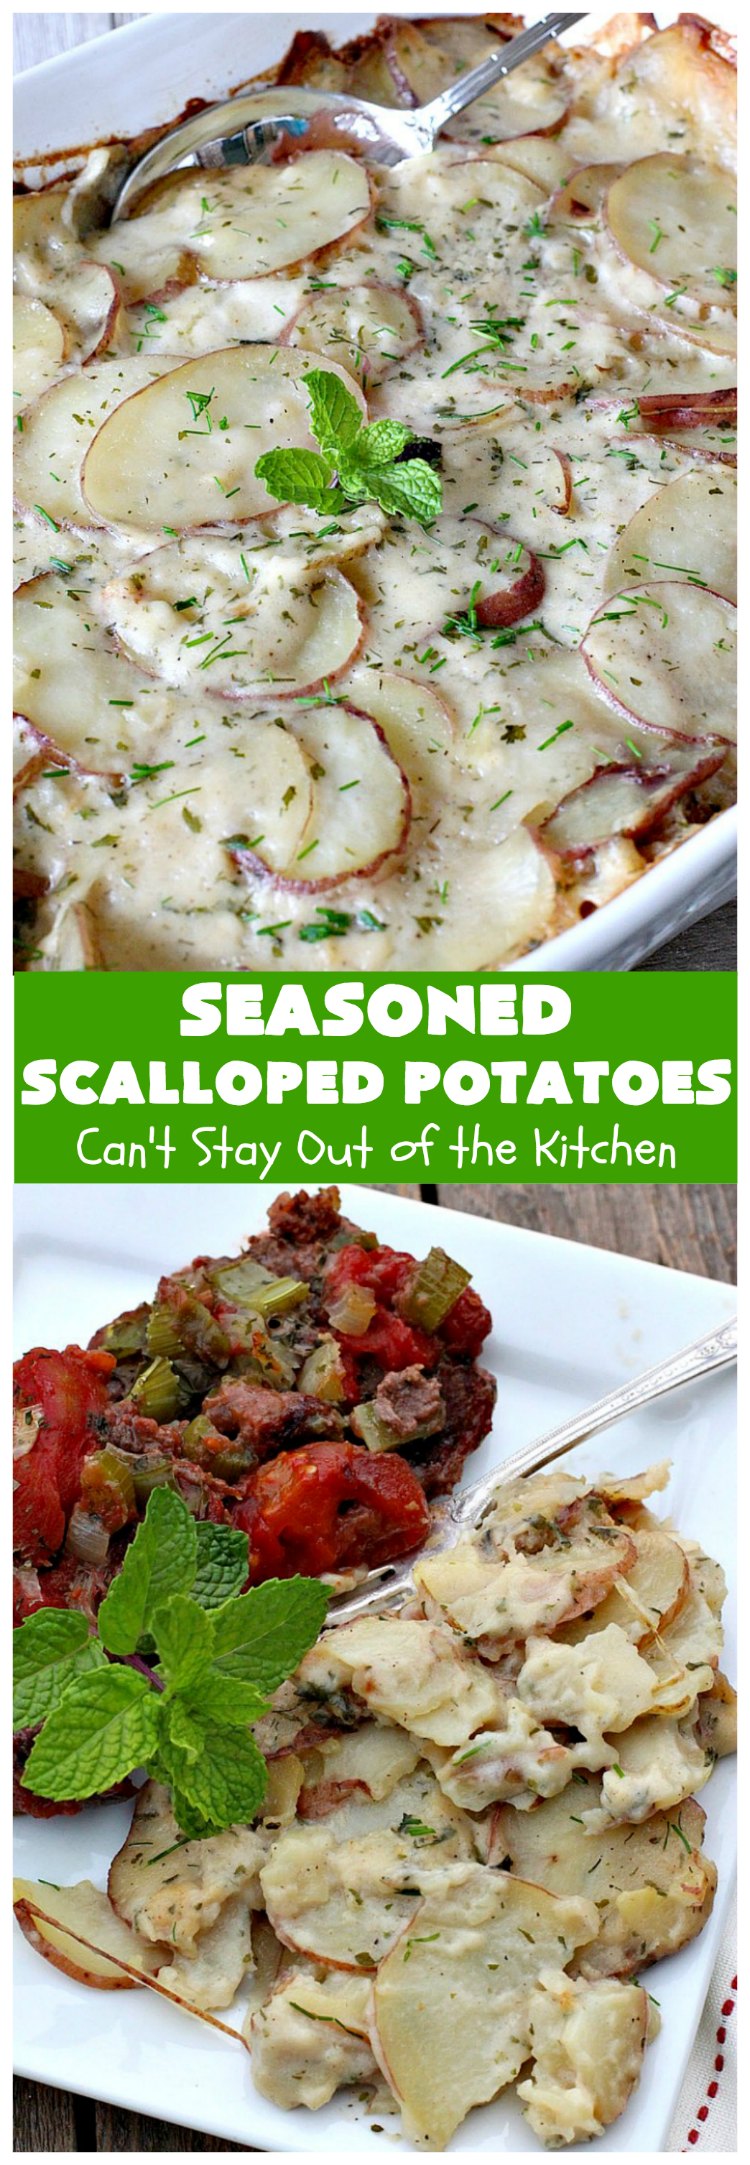 Seasoned Scalloped Potatoes | Can't Stay Out of the Kitchen